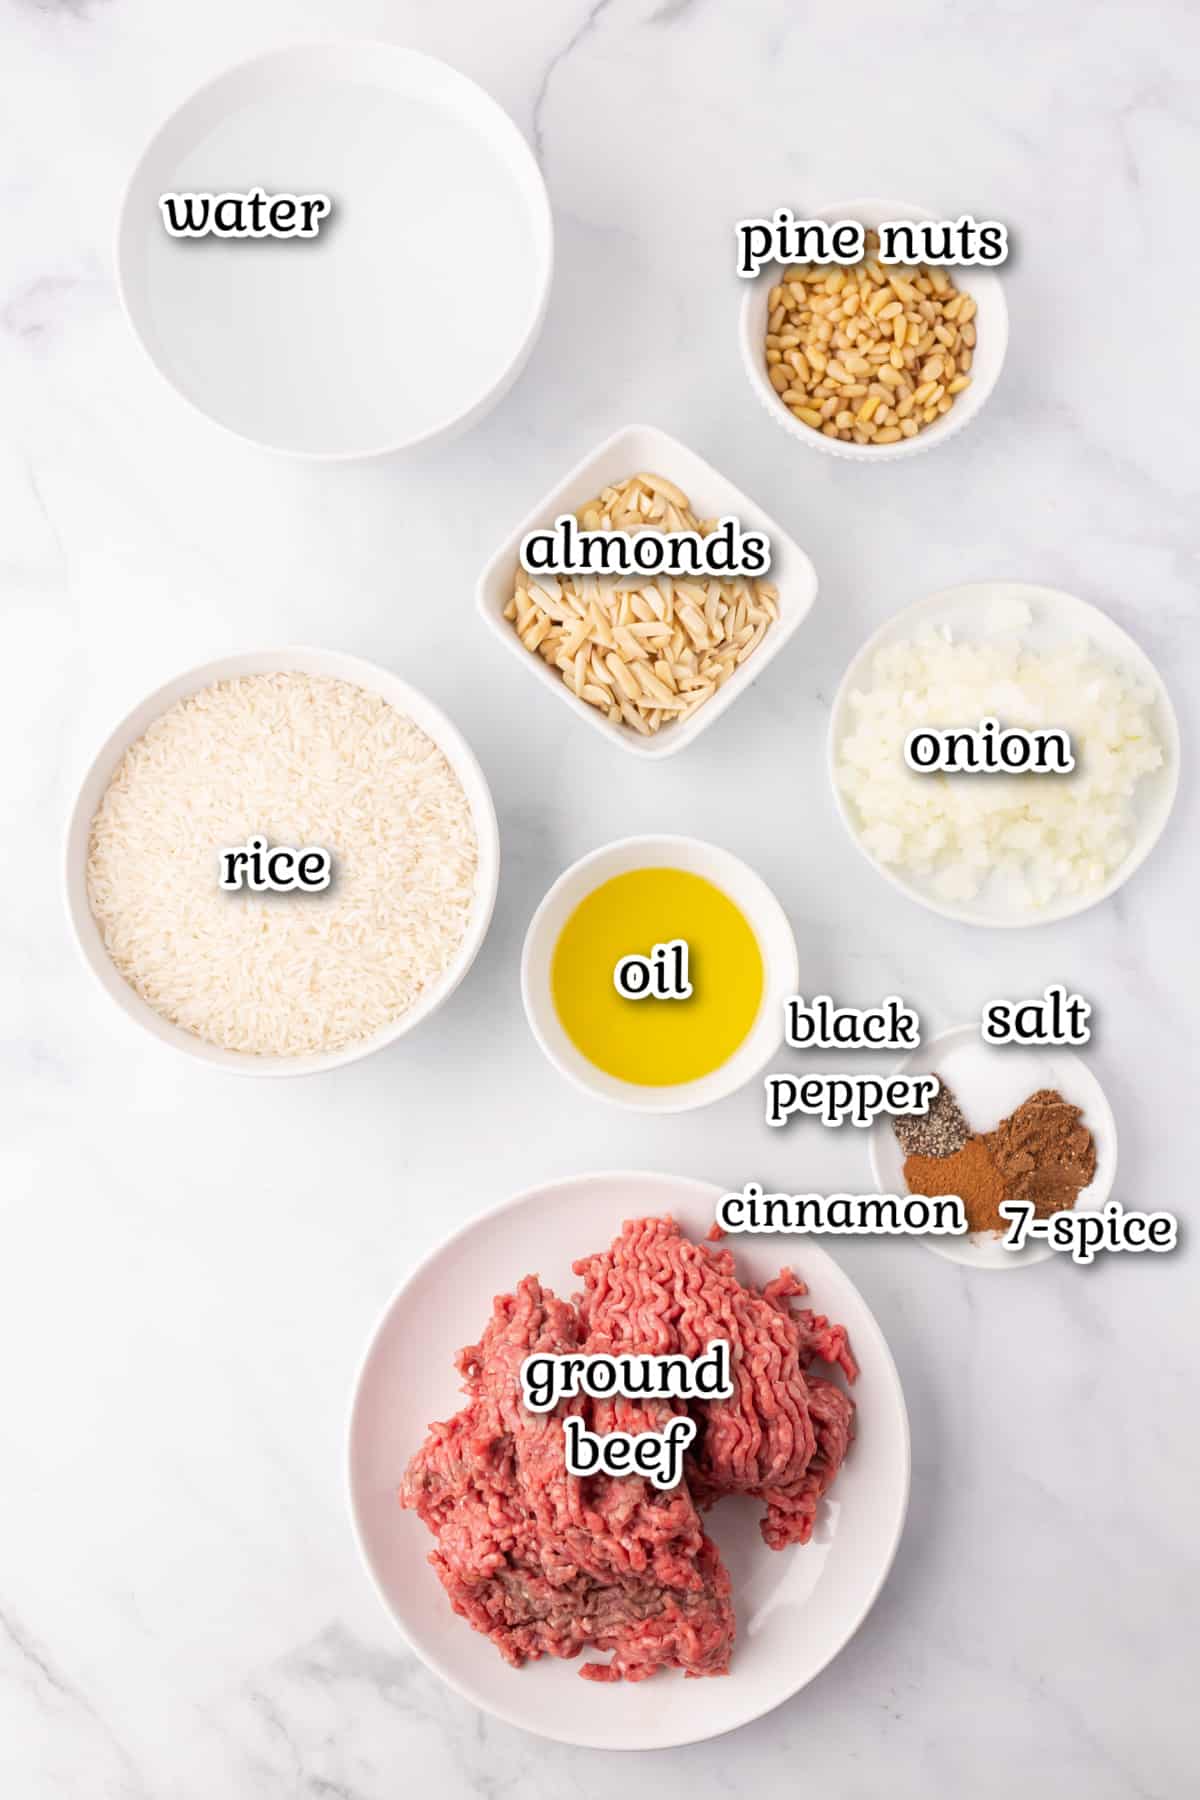 Recipe ingredients with text overlay.